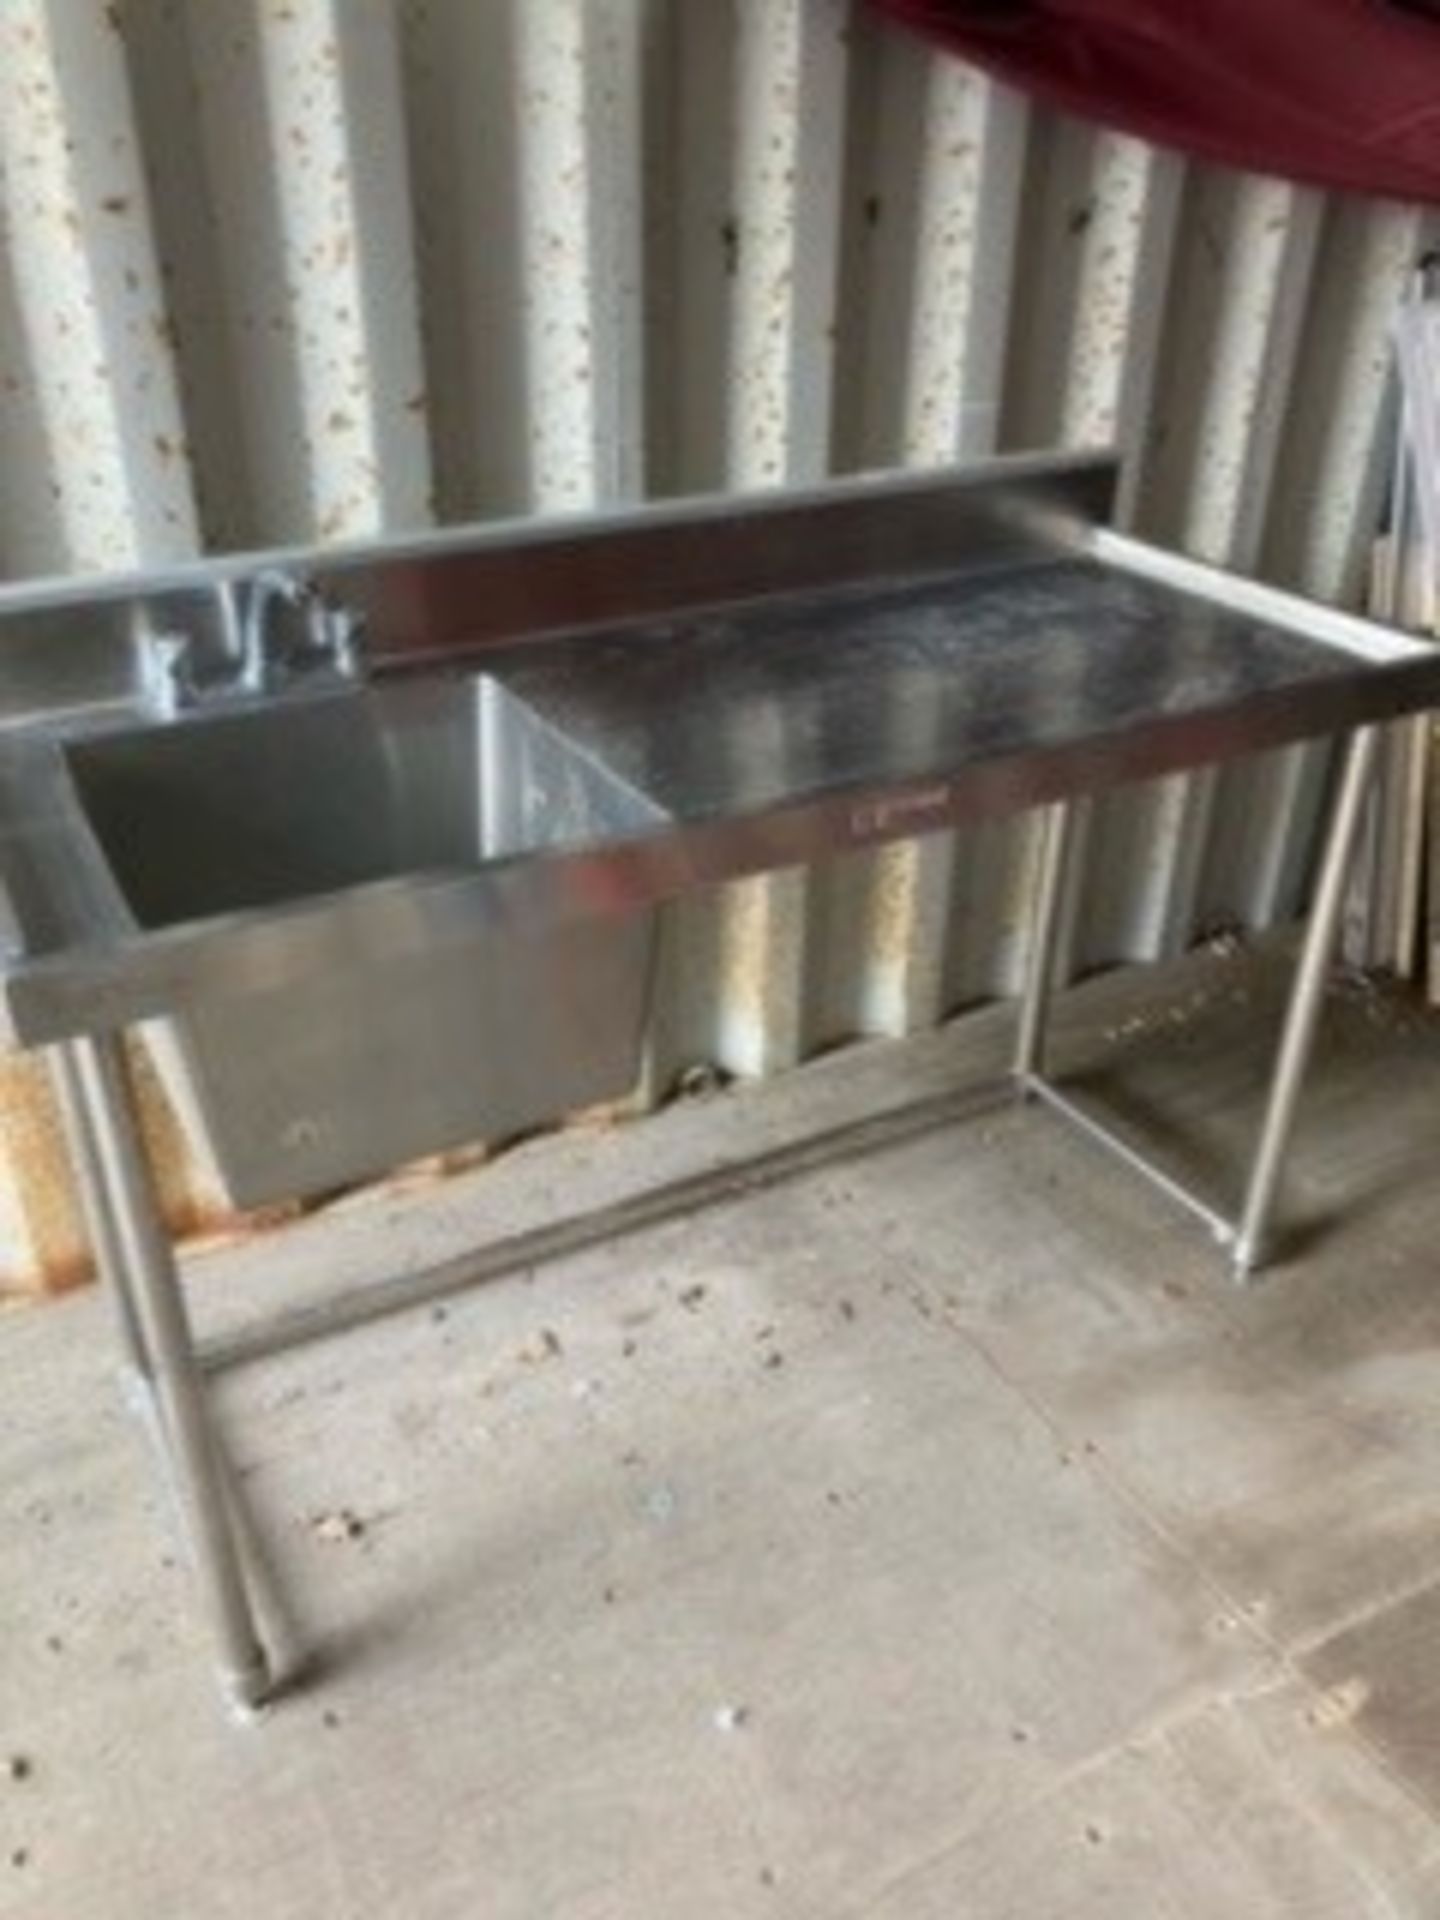 Simply Stainless Steel Sink Unit - Image 2 of 5